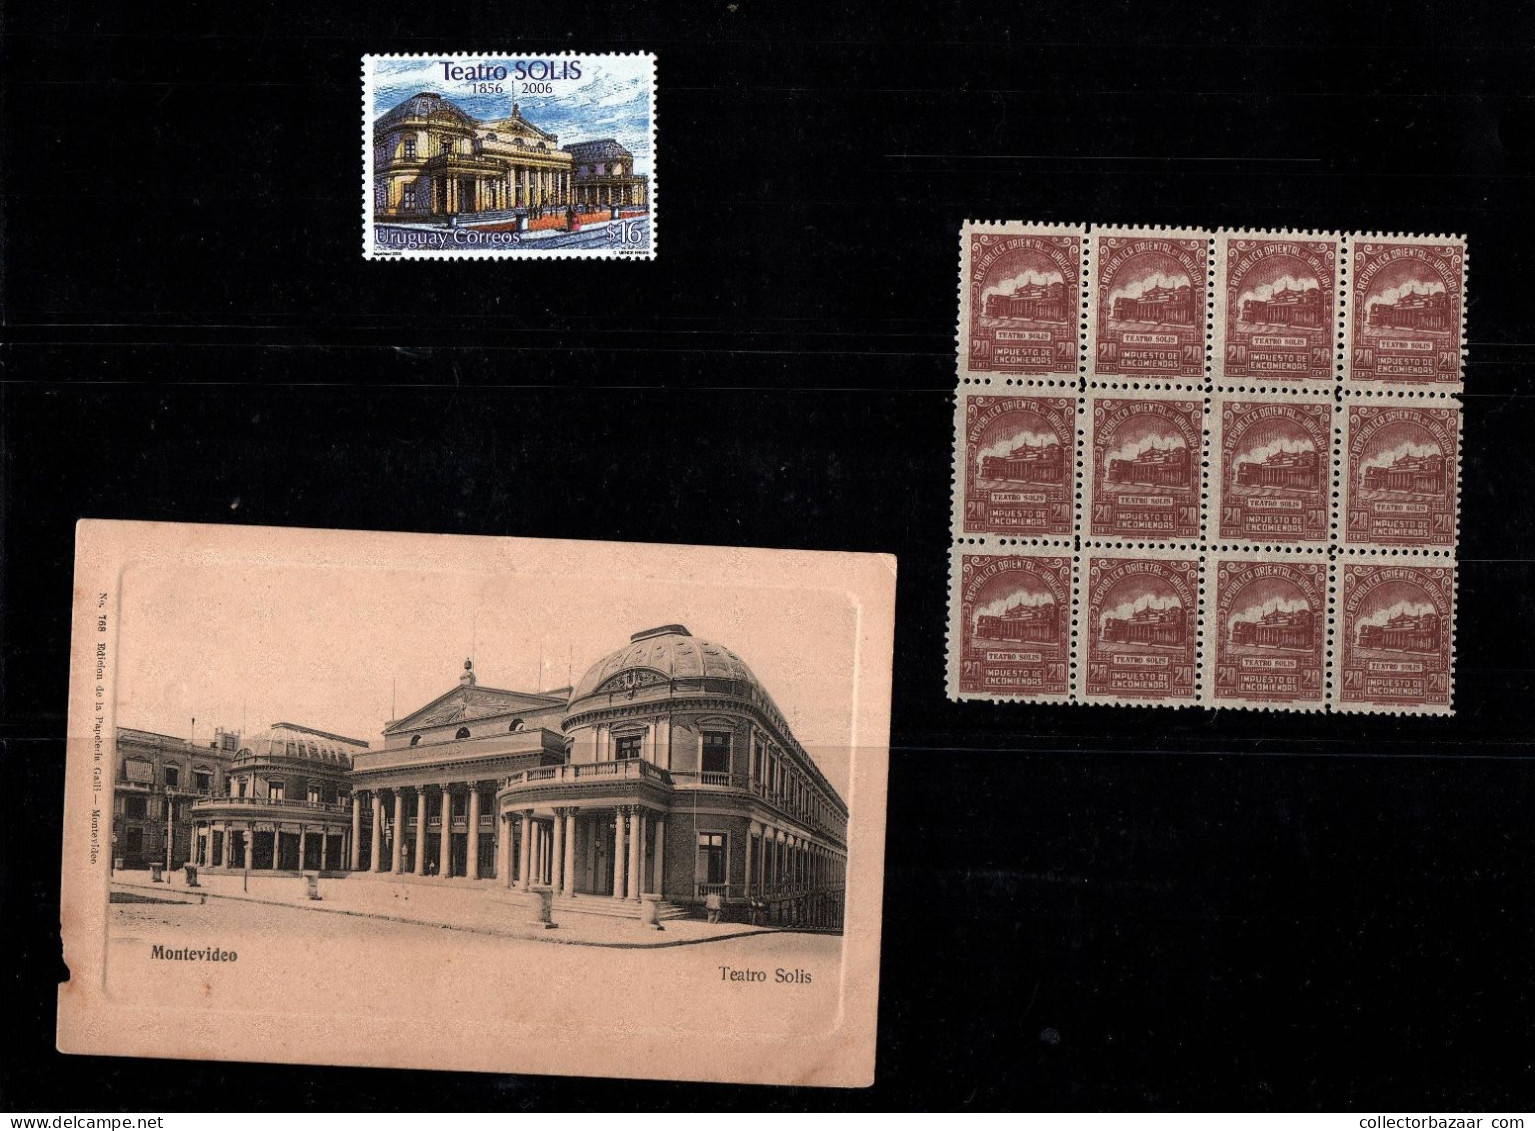 Solis Theatre Uruguay Stamps Postcard Collection Epitome Of Masonic Architecture Freemasonry - Franc-Maçonnerie